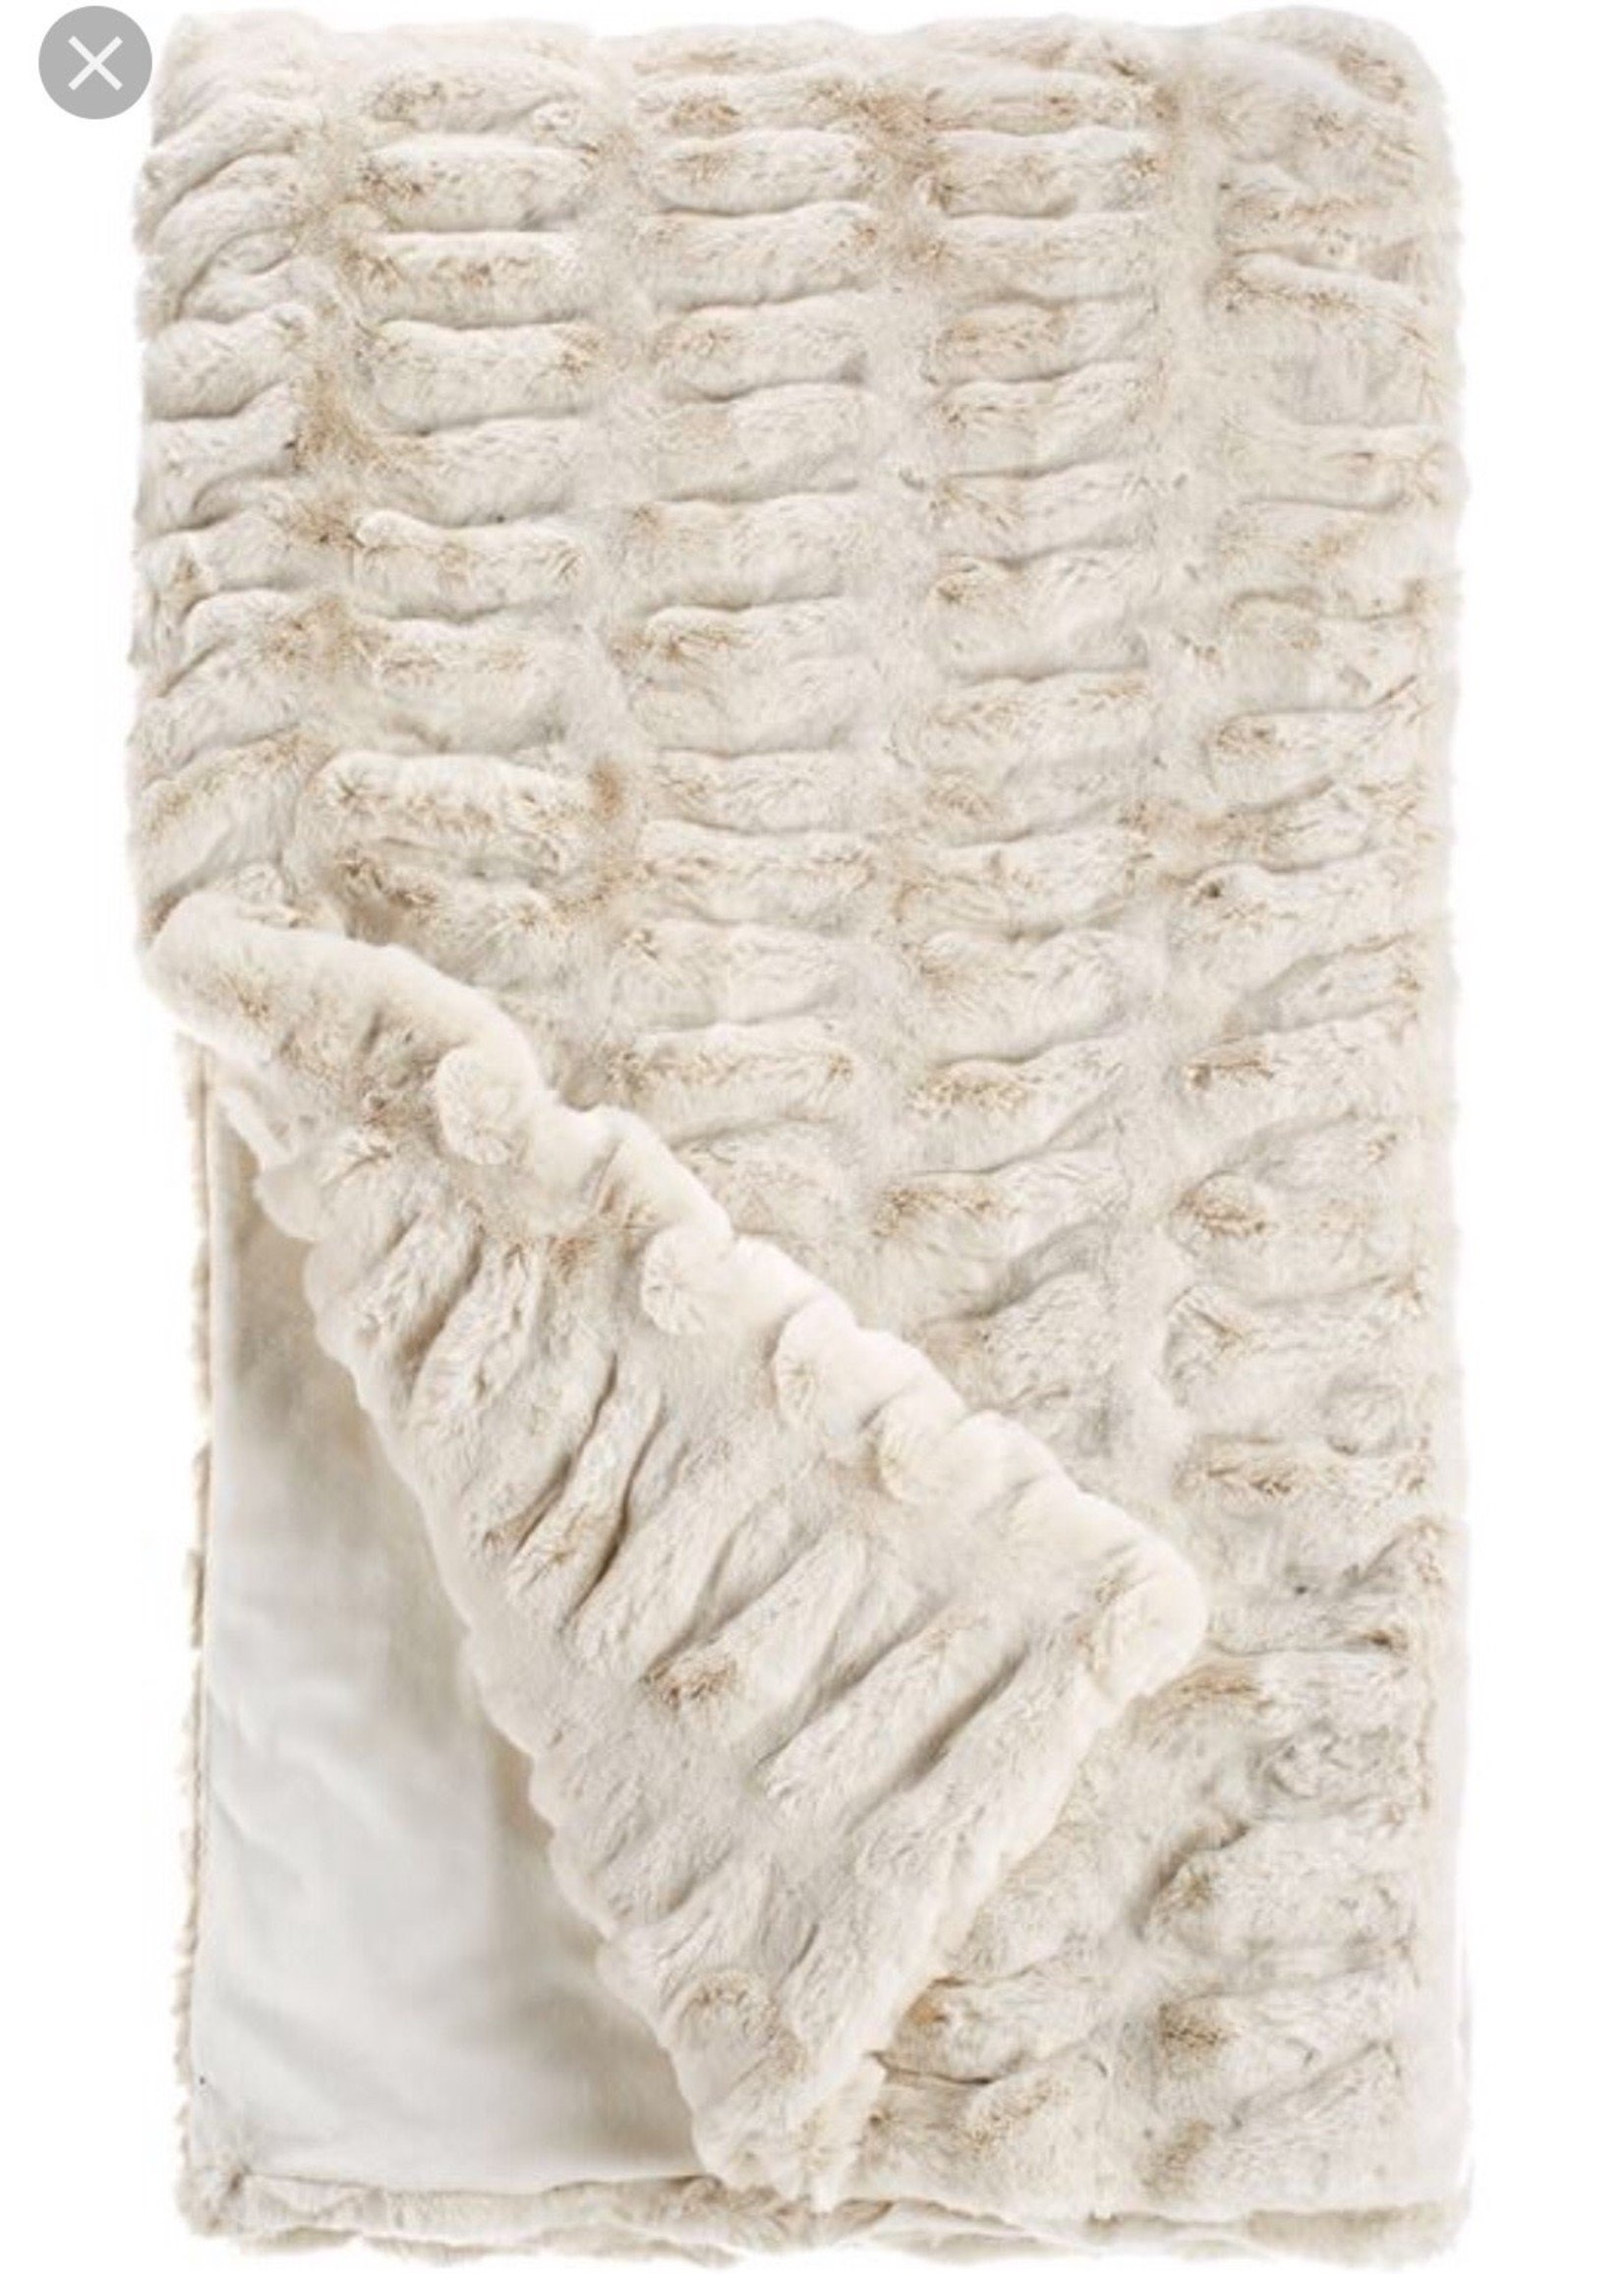 Fabulous Furs Couture Throw Ivory Mink 60 x 60